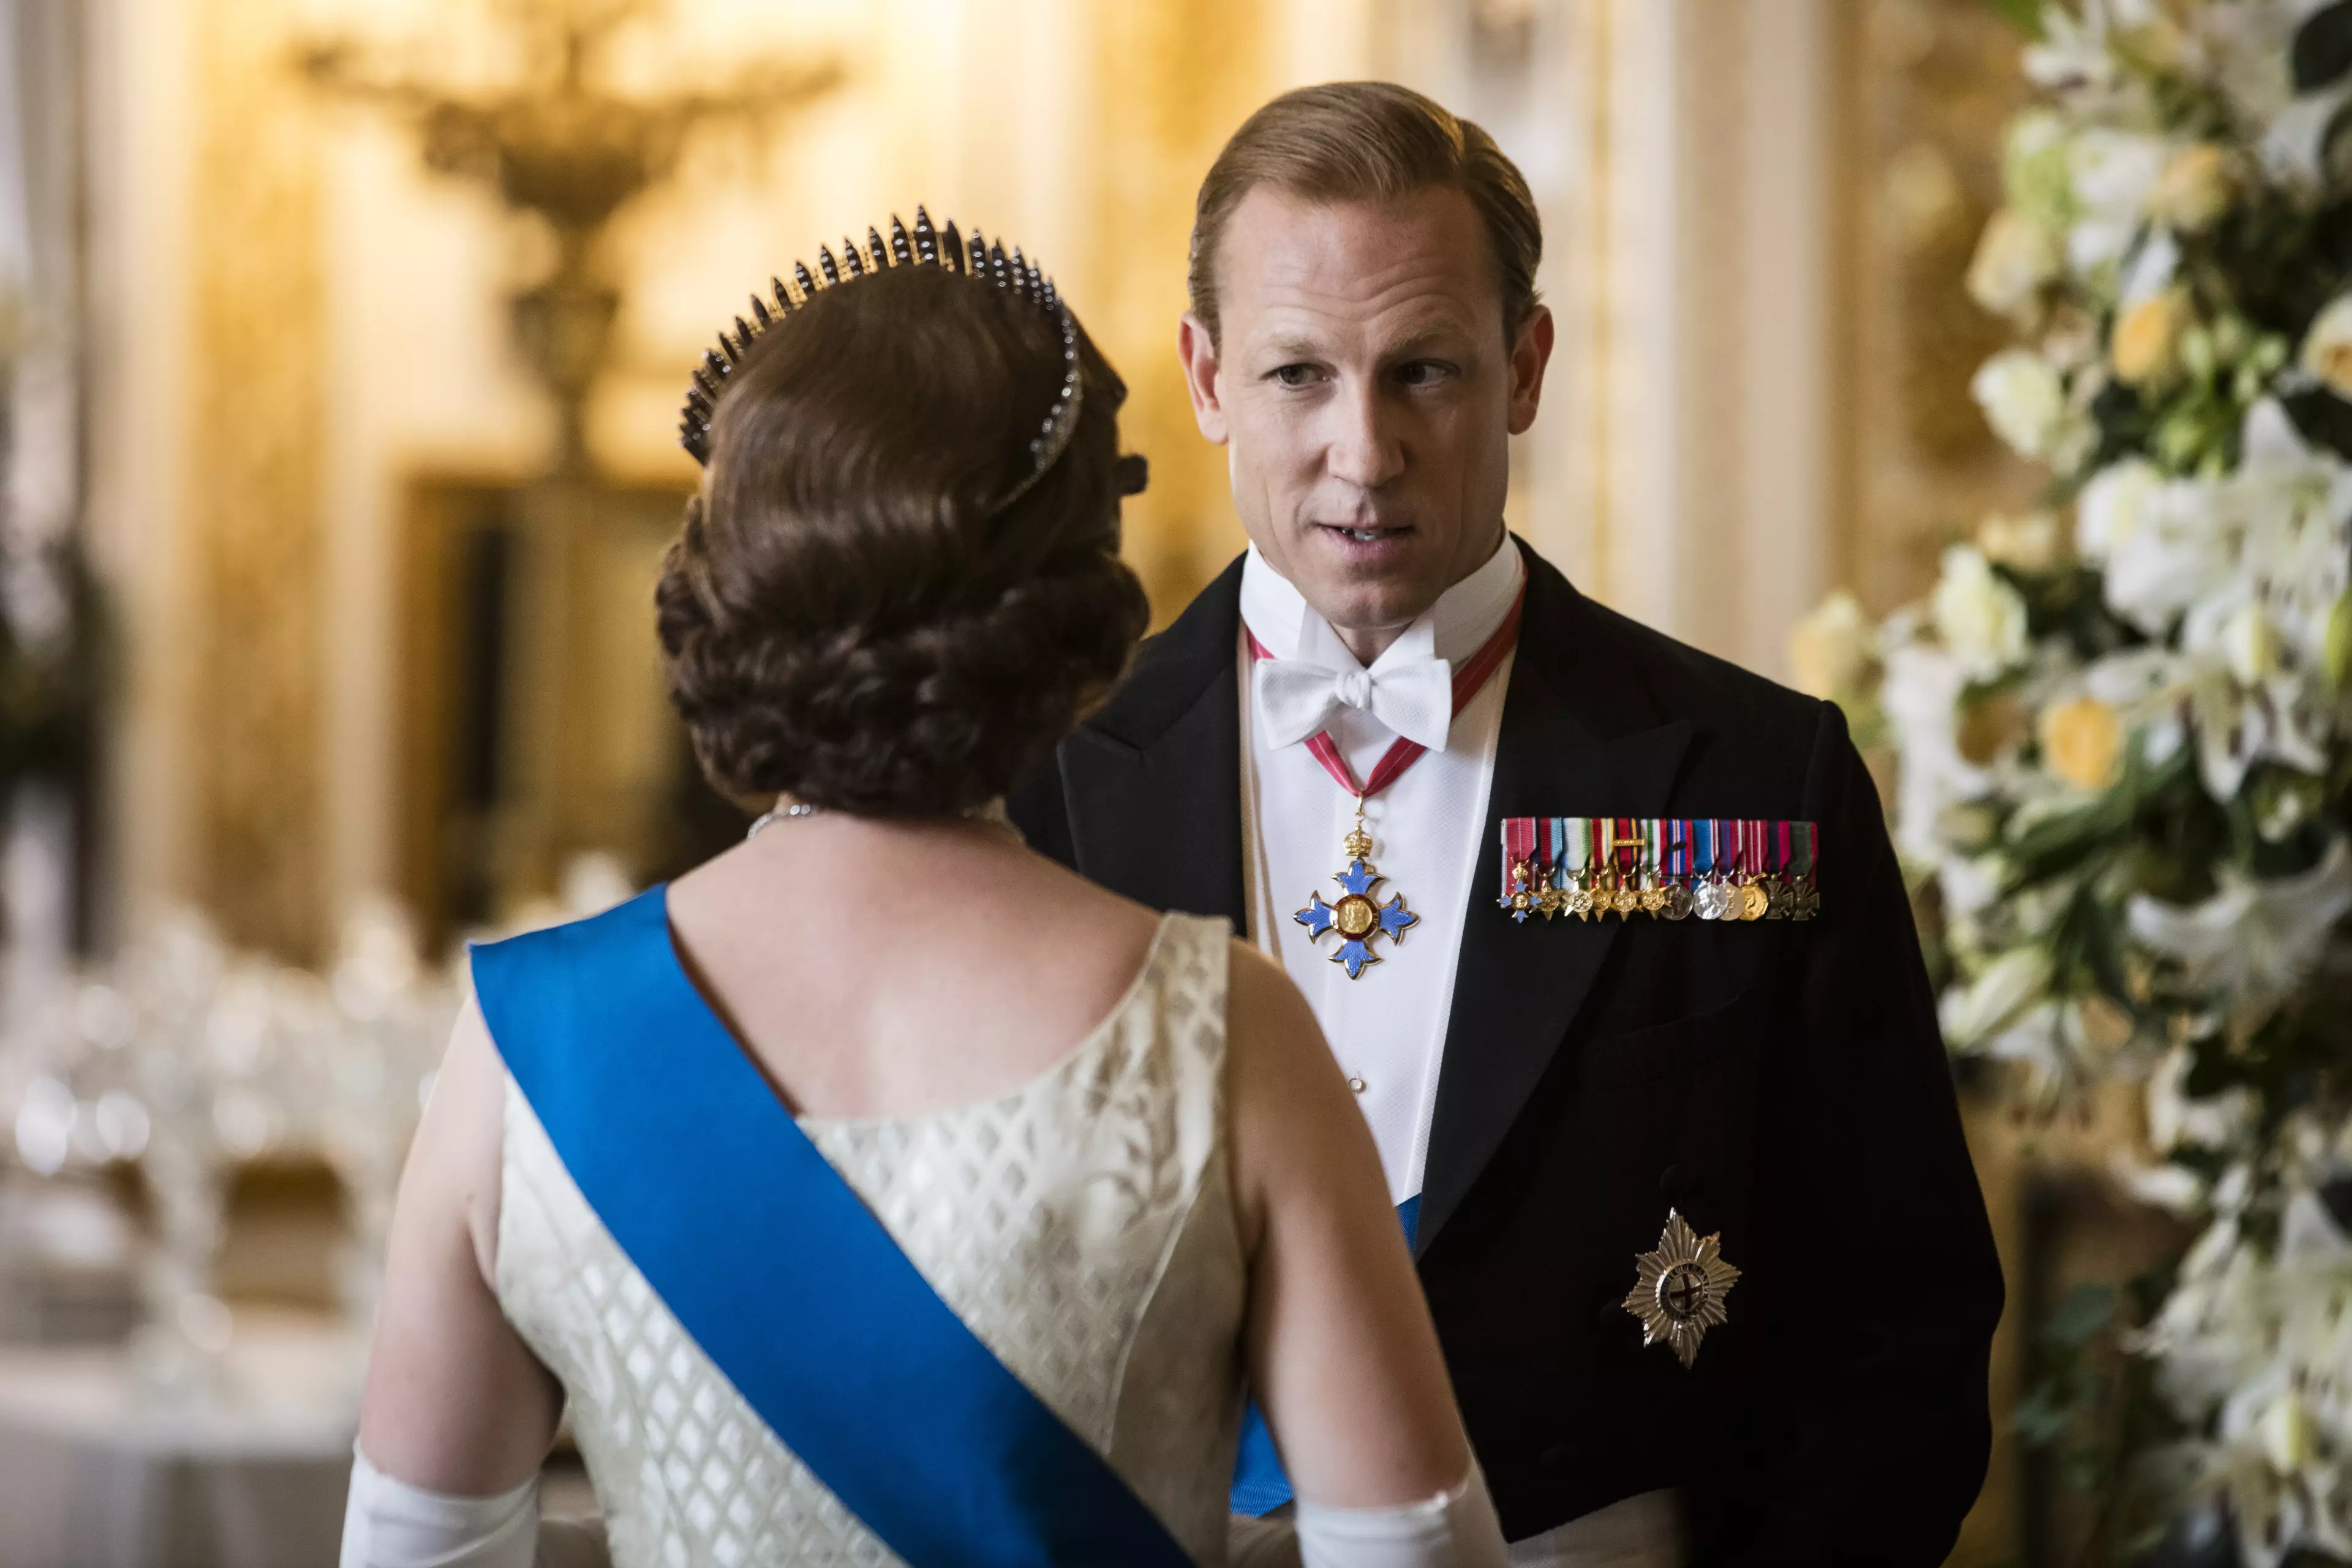 Tobias Menzies will take on the role of Prince Philip in seasons 3 and 4. (